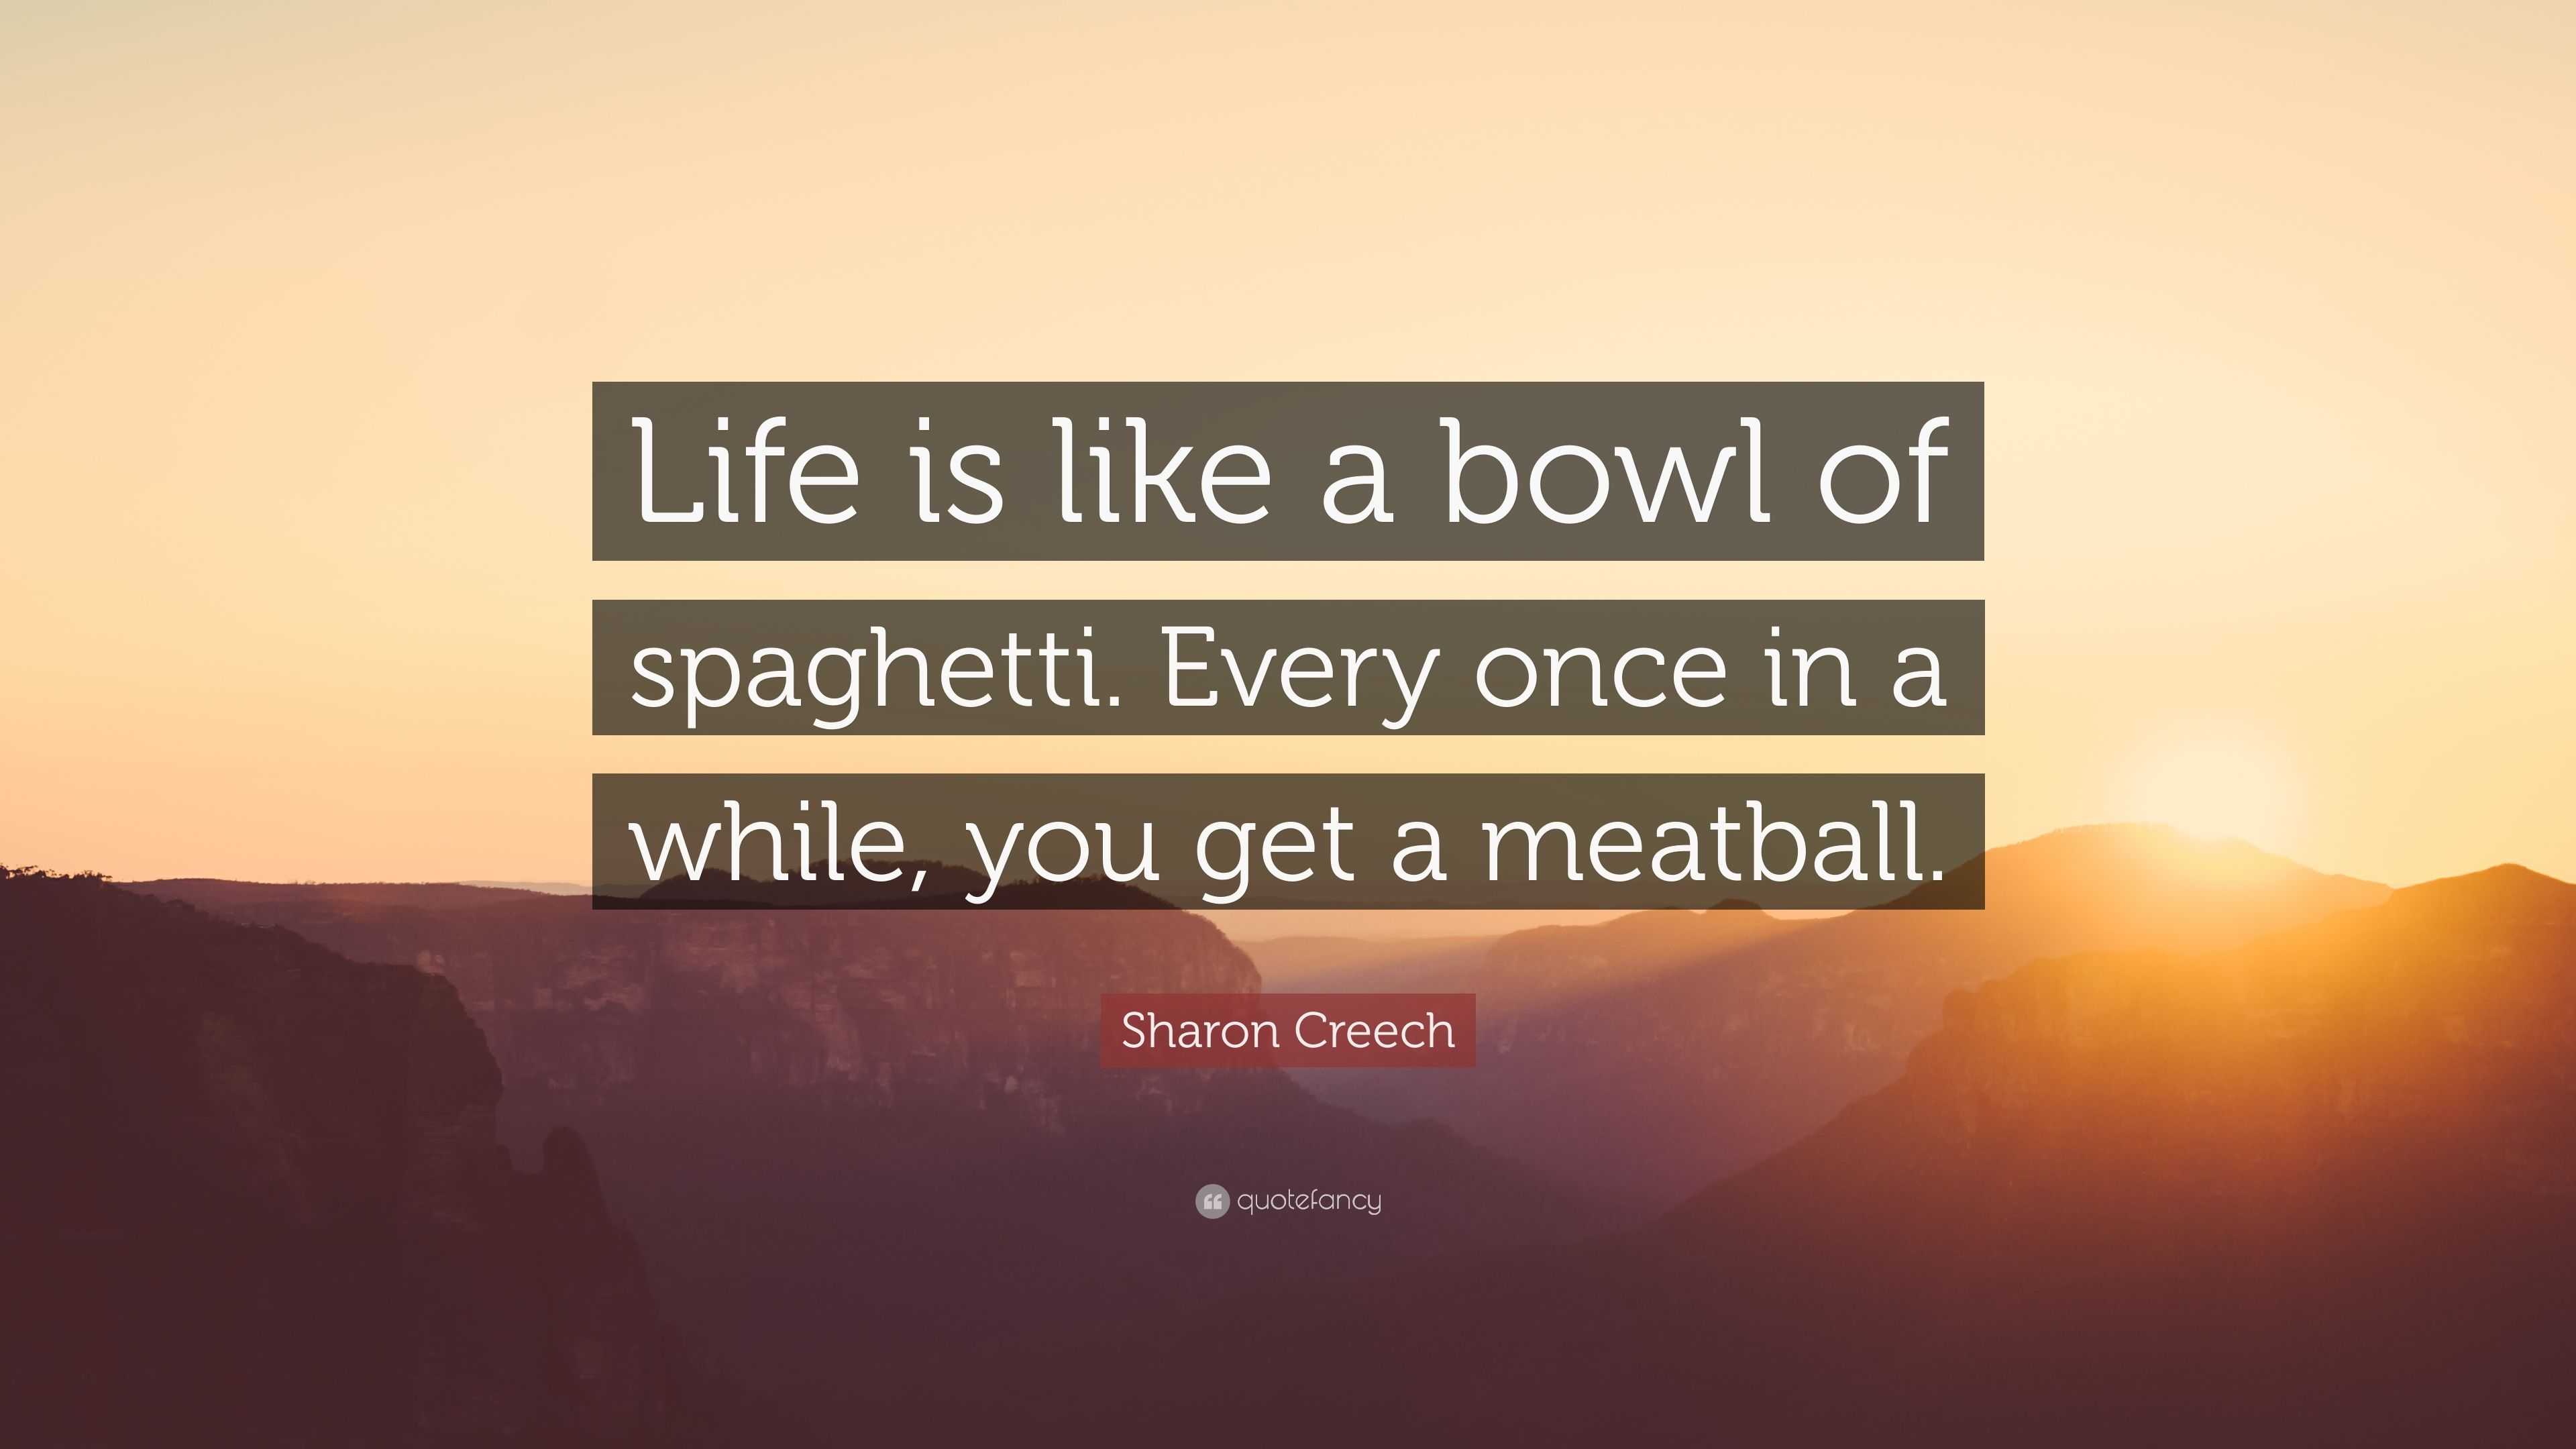 Sharon Creech Quote: “Life is like a bowl of spaghetti. Every once in a